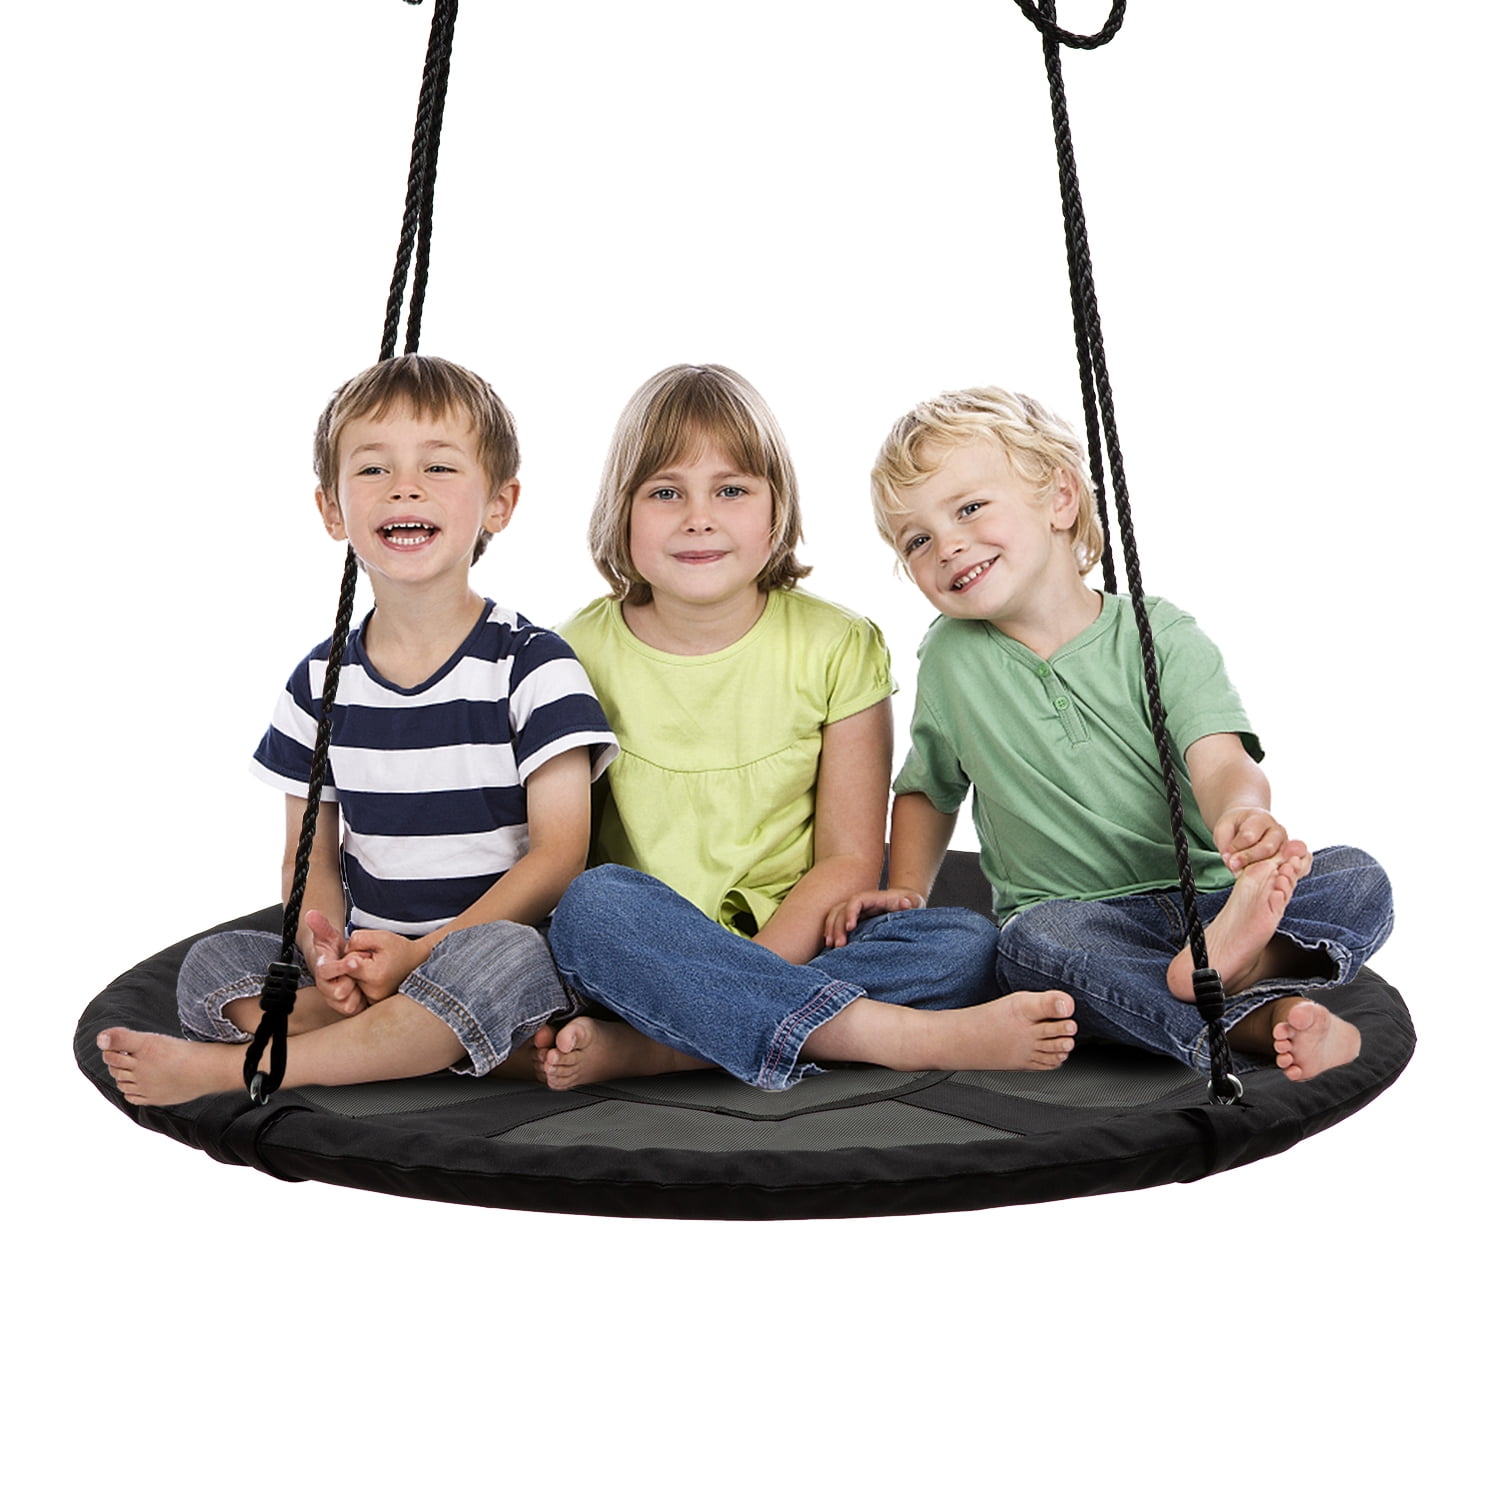 Details about   EVA Adjustable Board Swing Seat w/Rope Children Fitness Hanging Swing Chair Toy 